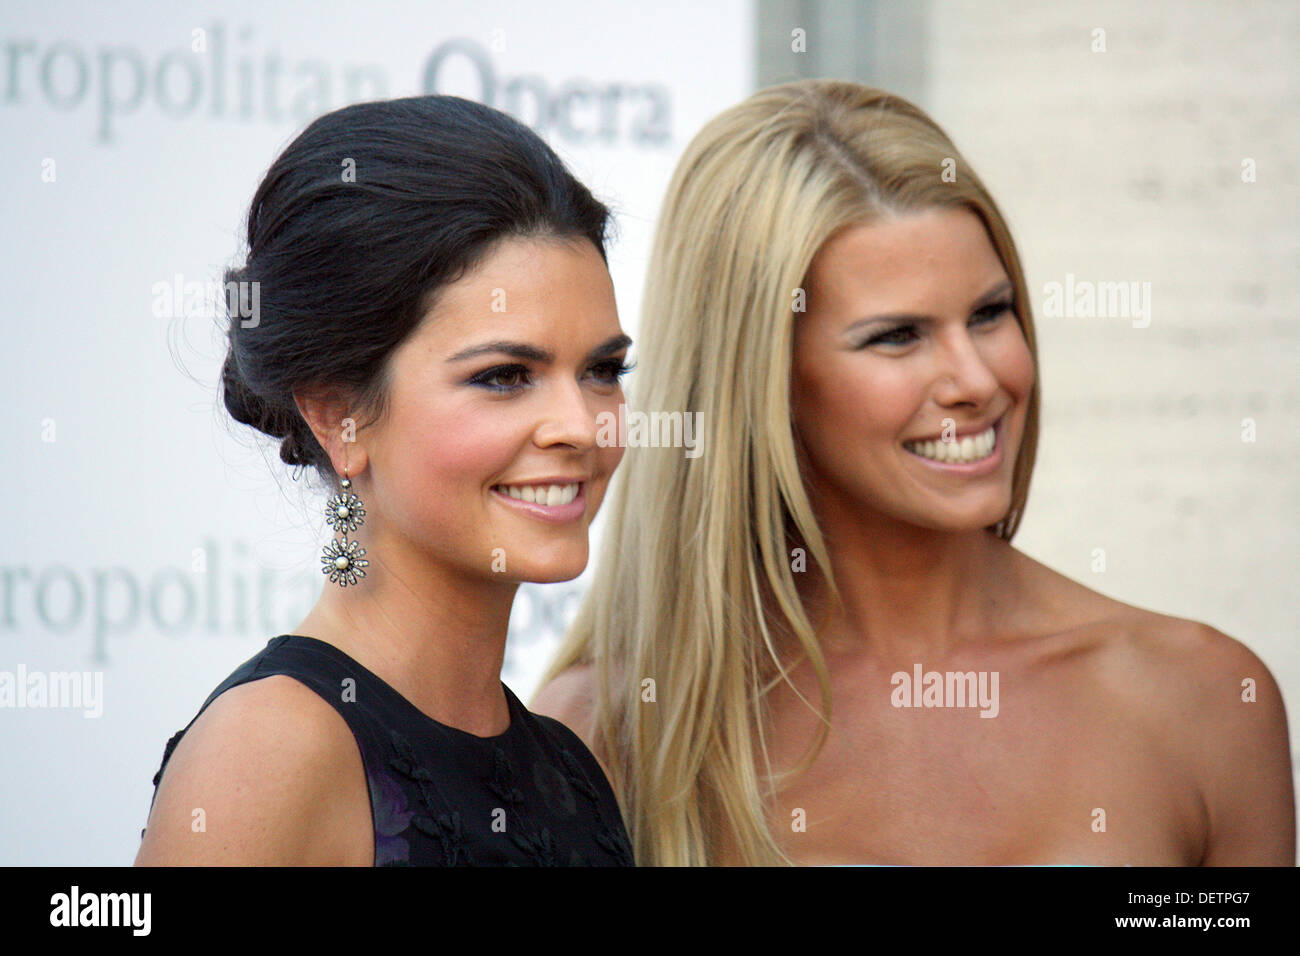 New York, USA. 23rd Sep, 2013. Beth Ostrosky Stern (R) and Katie Lee arrive for the season opening of the Metropolitan Opera in new York, USA, 23 September 2013. Pyotr Tchaikovsky's opera Eugene Onegin opened the Met's new season. The Metropolitan Opera is considered one of the world's best opera houses and the season opening is always a major event of New York's society. Photo: Christina Horsten/dpa/Alamy Live News Stock Photo